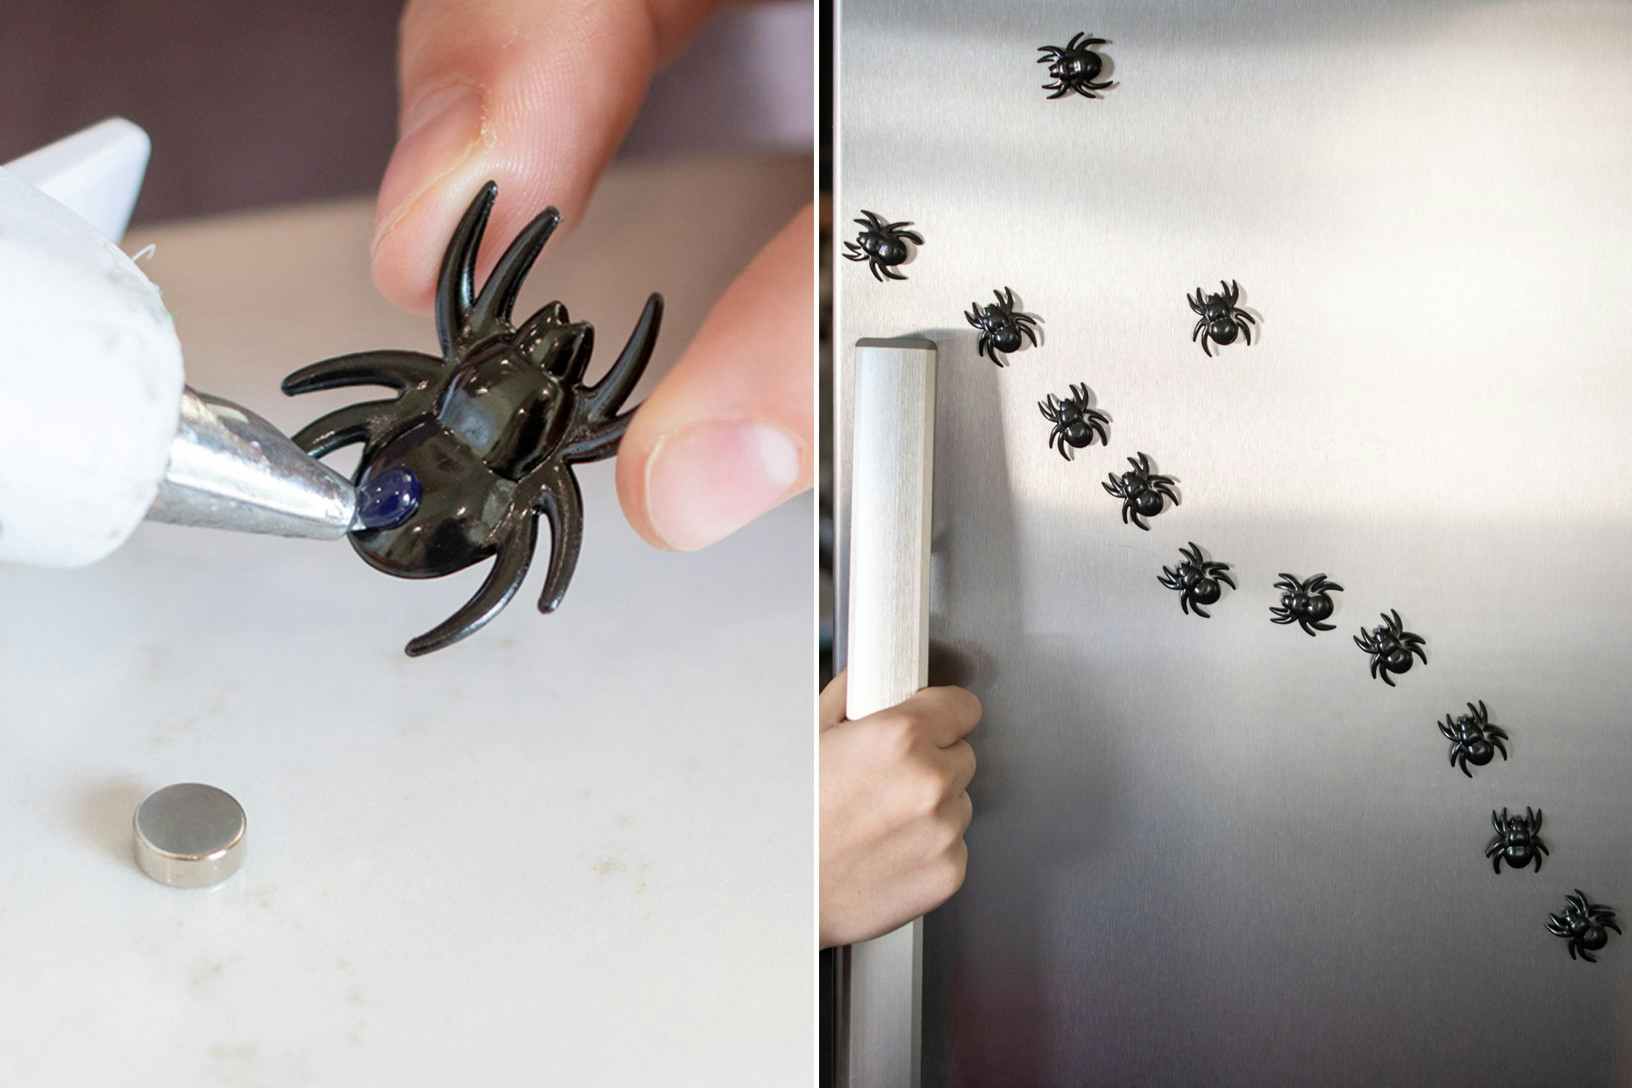 Two photos side by side: a person using hot glue to adhere a small magnet to the back of a plastic spider. A line of plastic spiders along a refrigerator door.